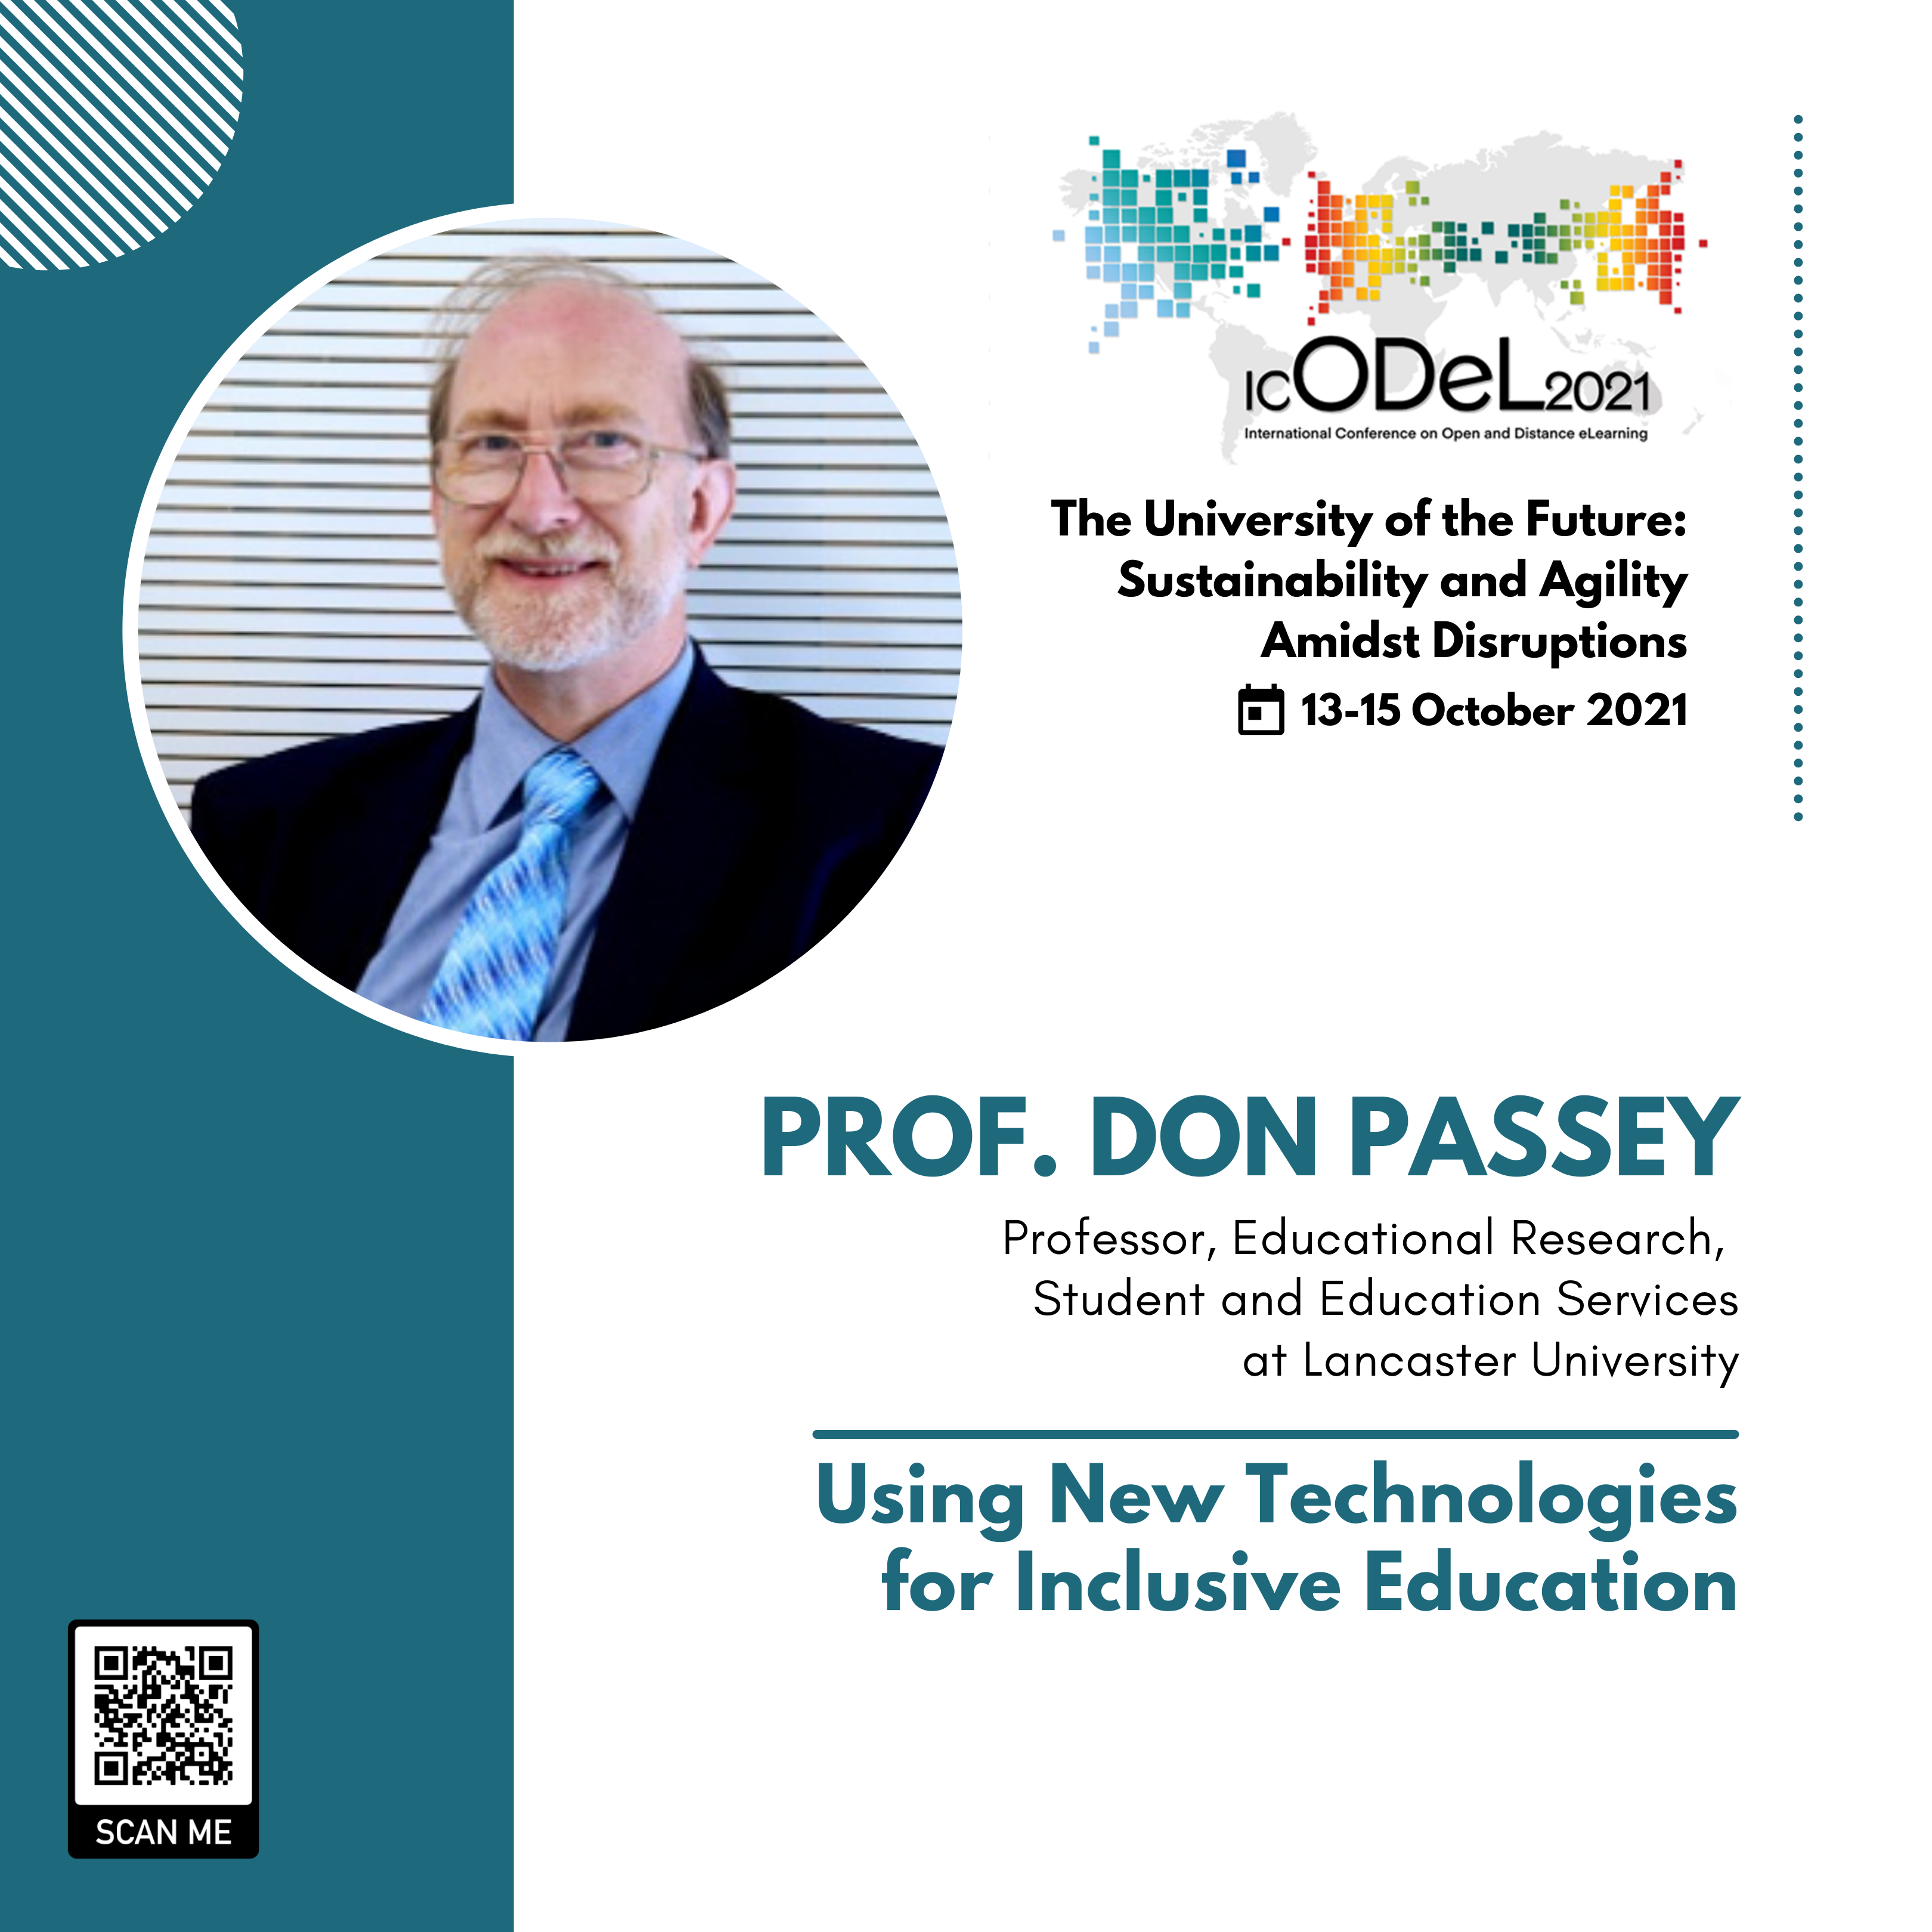 Lancaster University Professor Don Passey will be a Plenary Speaker for the 4th International Conference on Open and Distance e-Learning (ICODeL 2021).